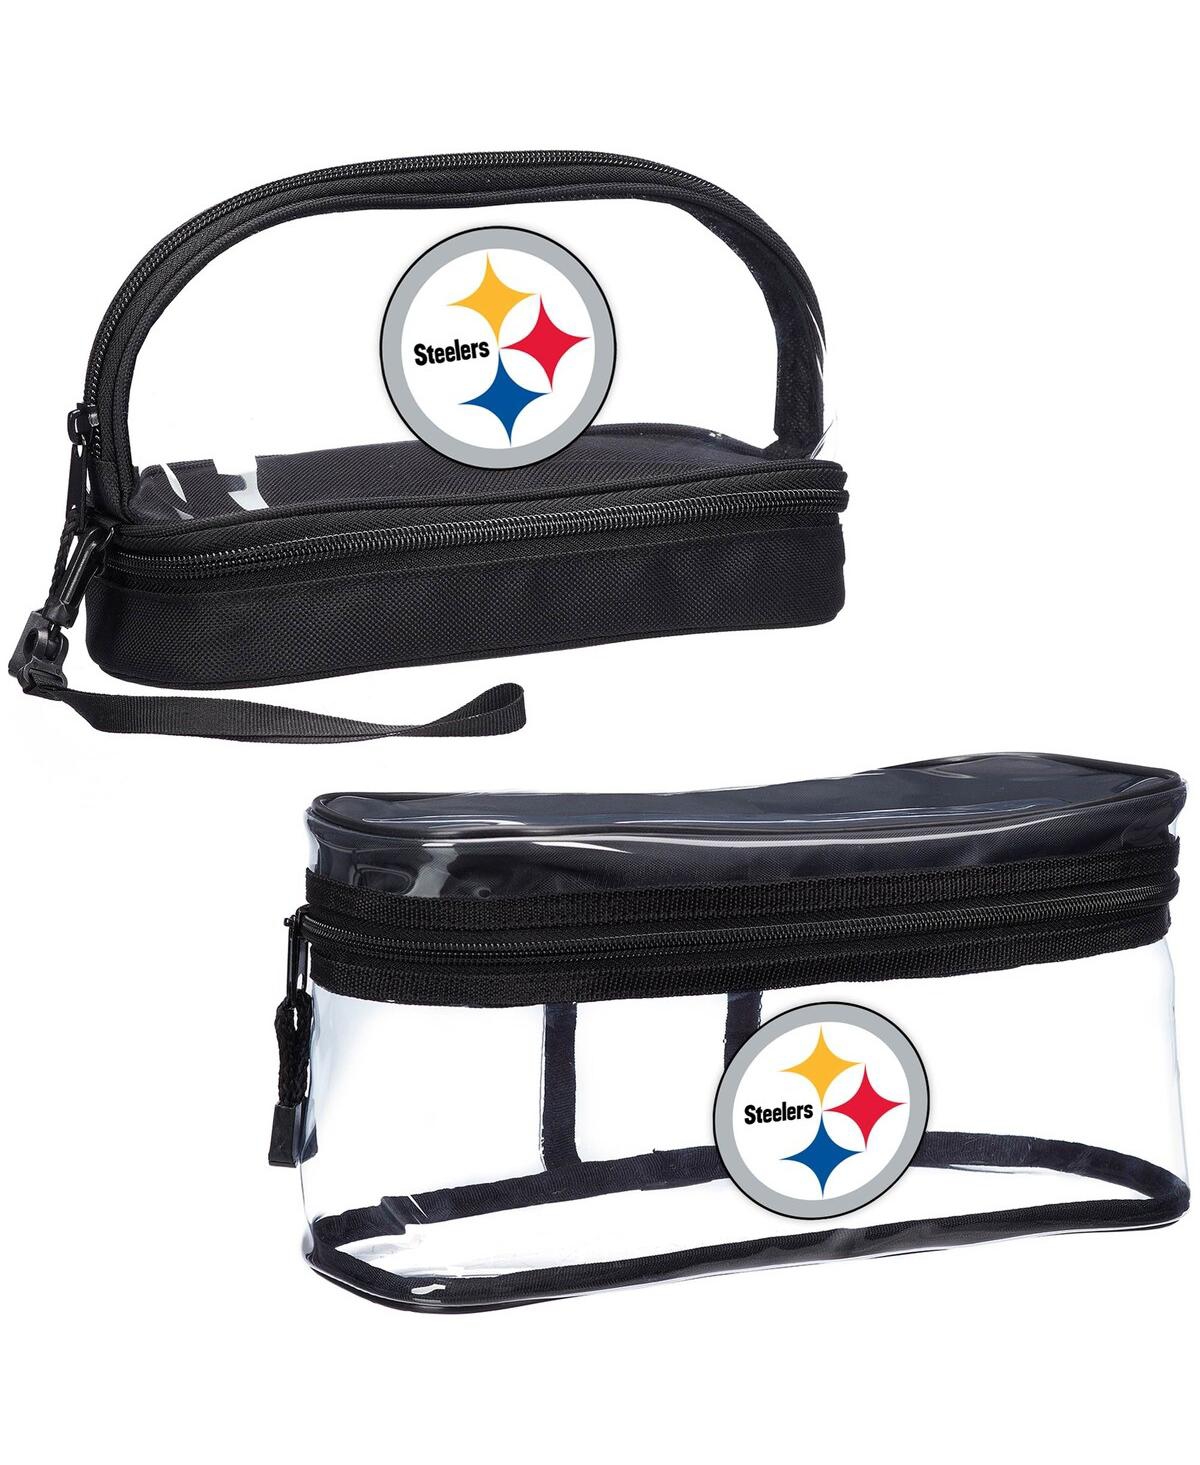 Men's and Women's The Northwest Company Pittsburgh Steelers Two-Piece Travel Set - Black